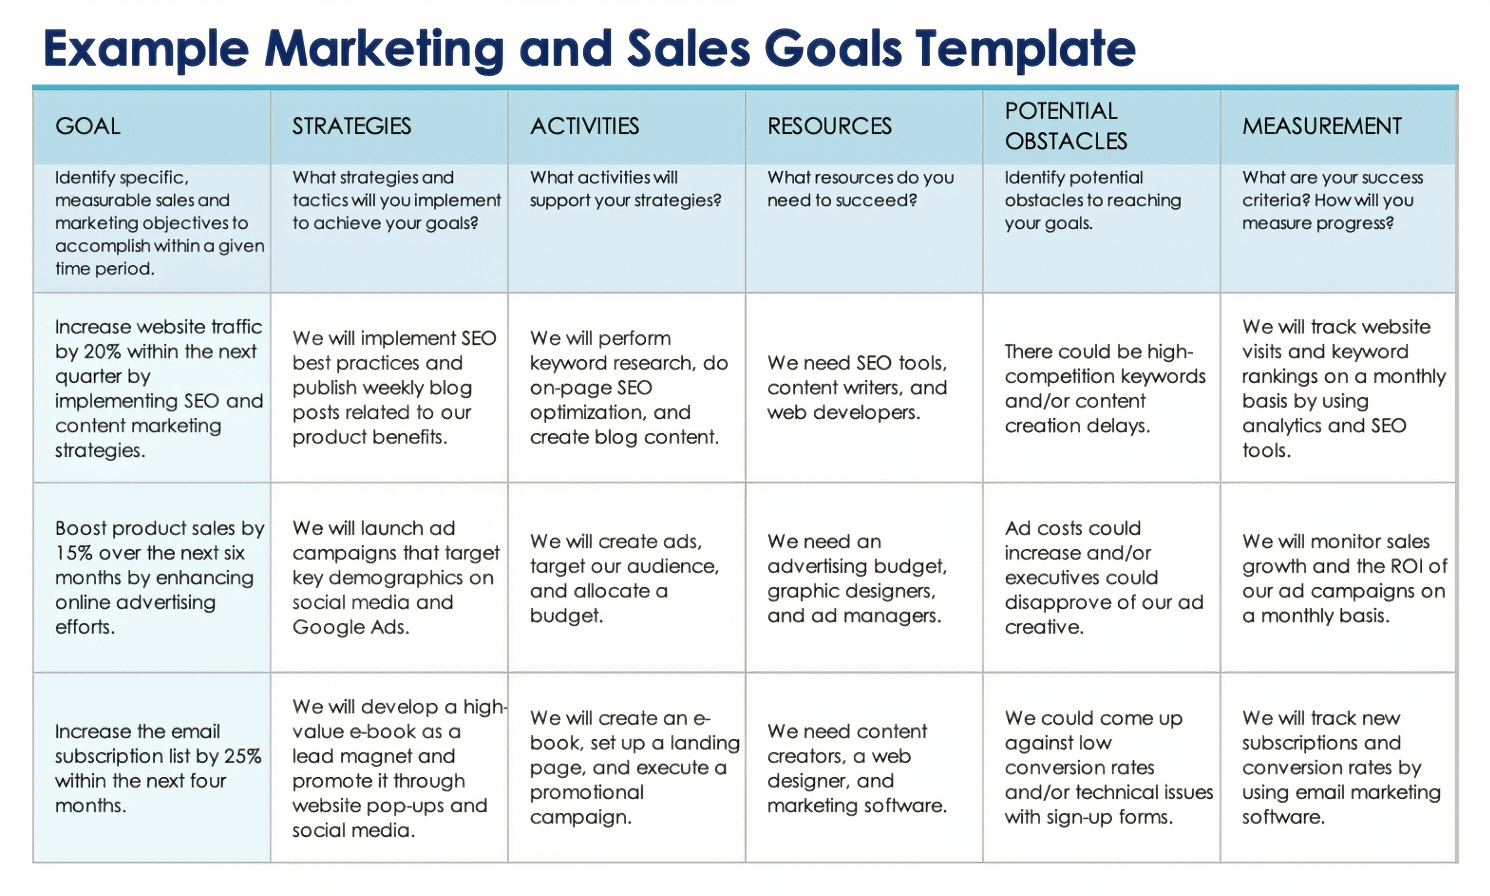 example marketing and sales goals template